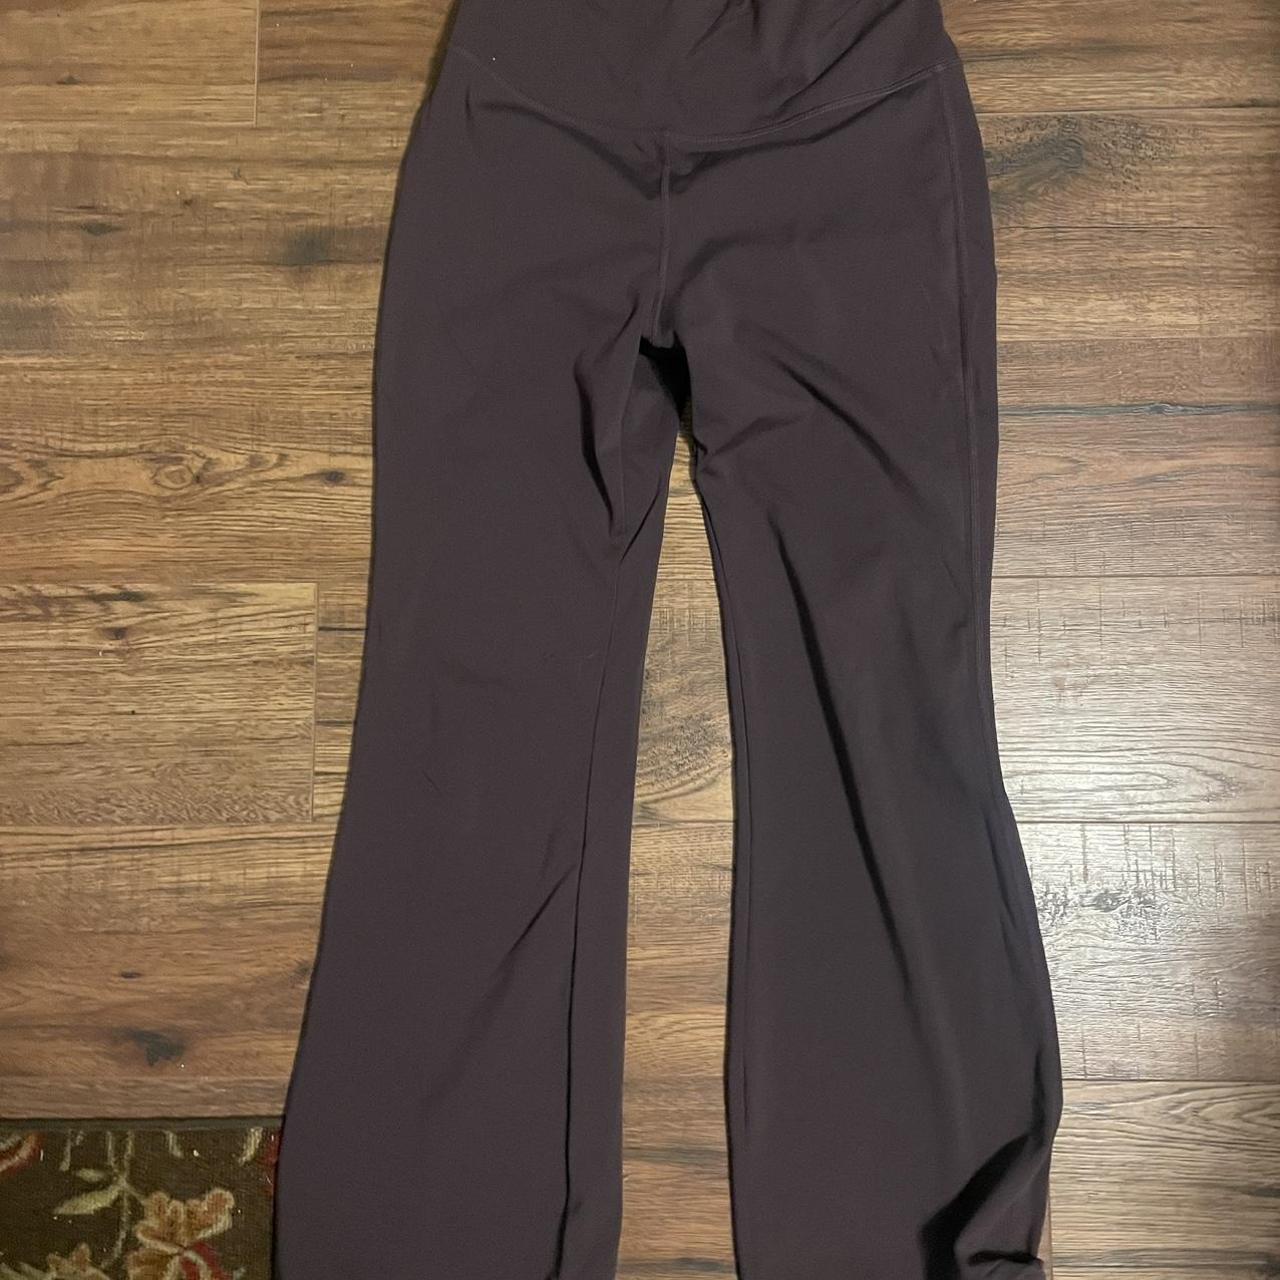 High waisted Halara leggings. Could fit a small or - Depop